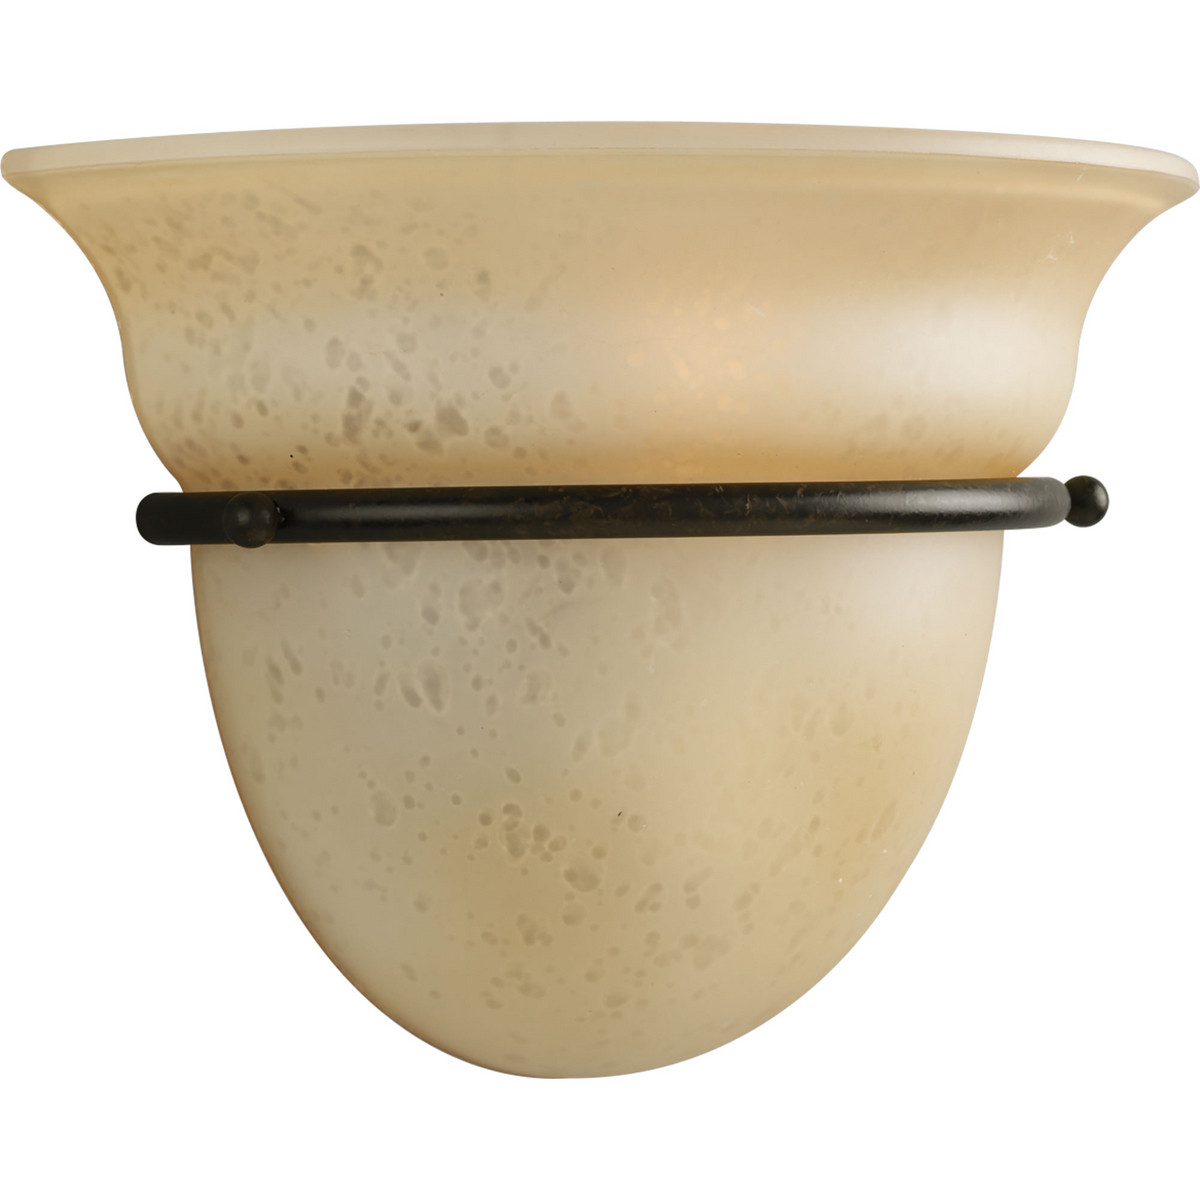 One-light wall sconce with tea stained oversized, bell-shaped glass bowl. Forged Bronze finish.